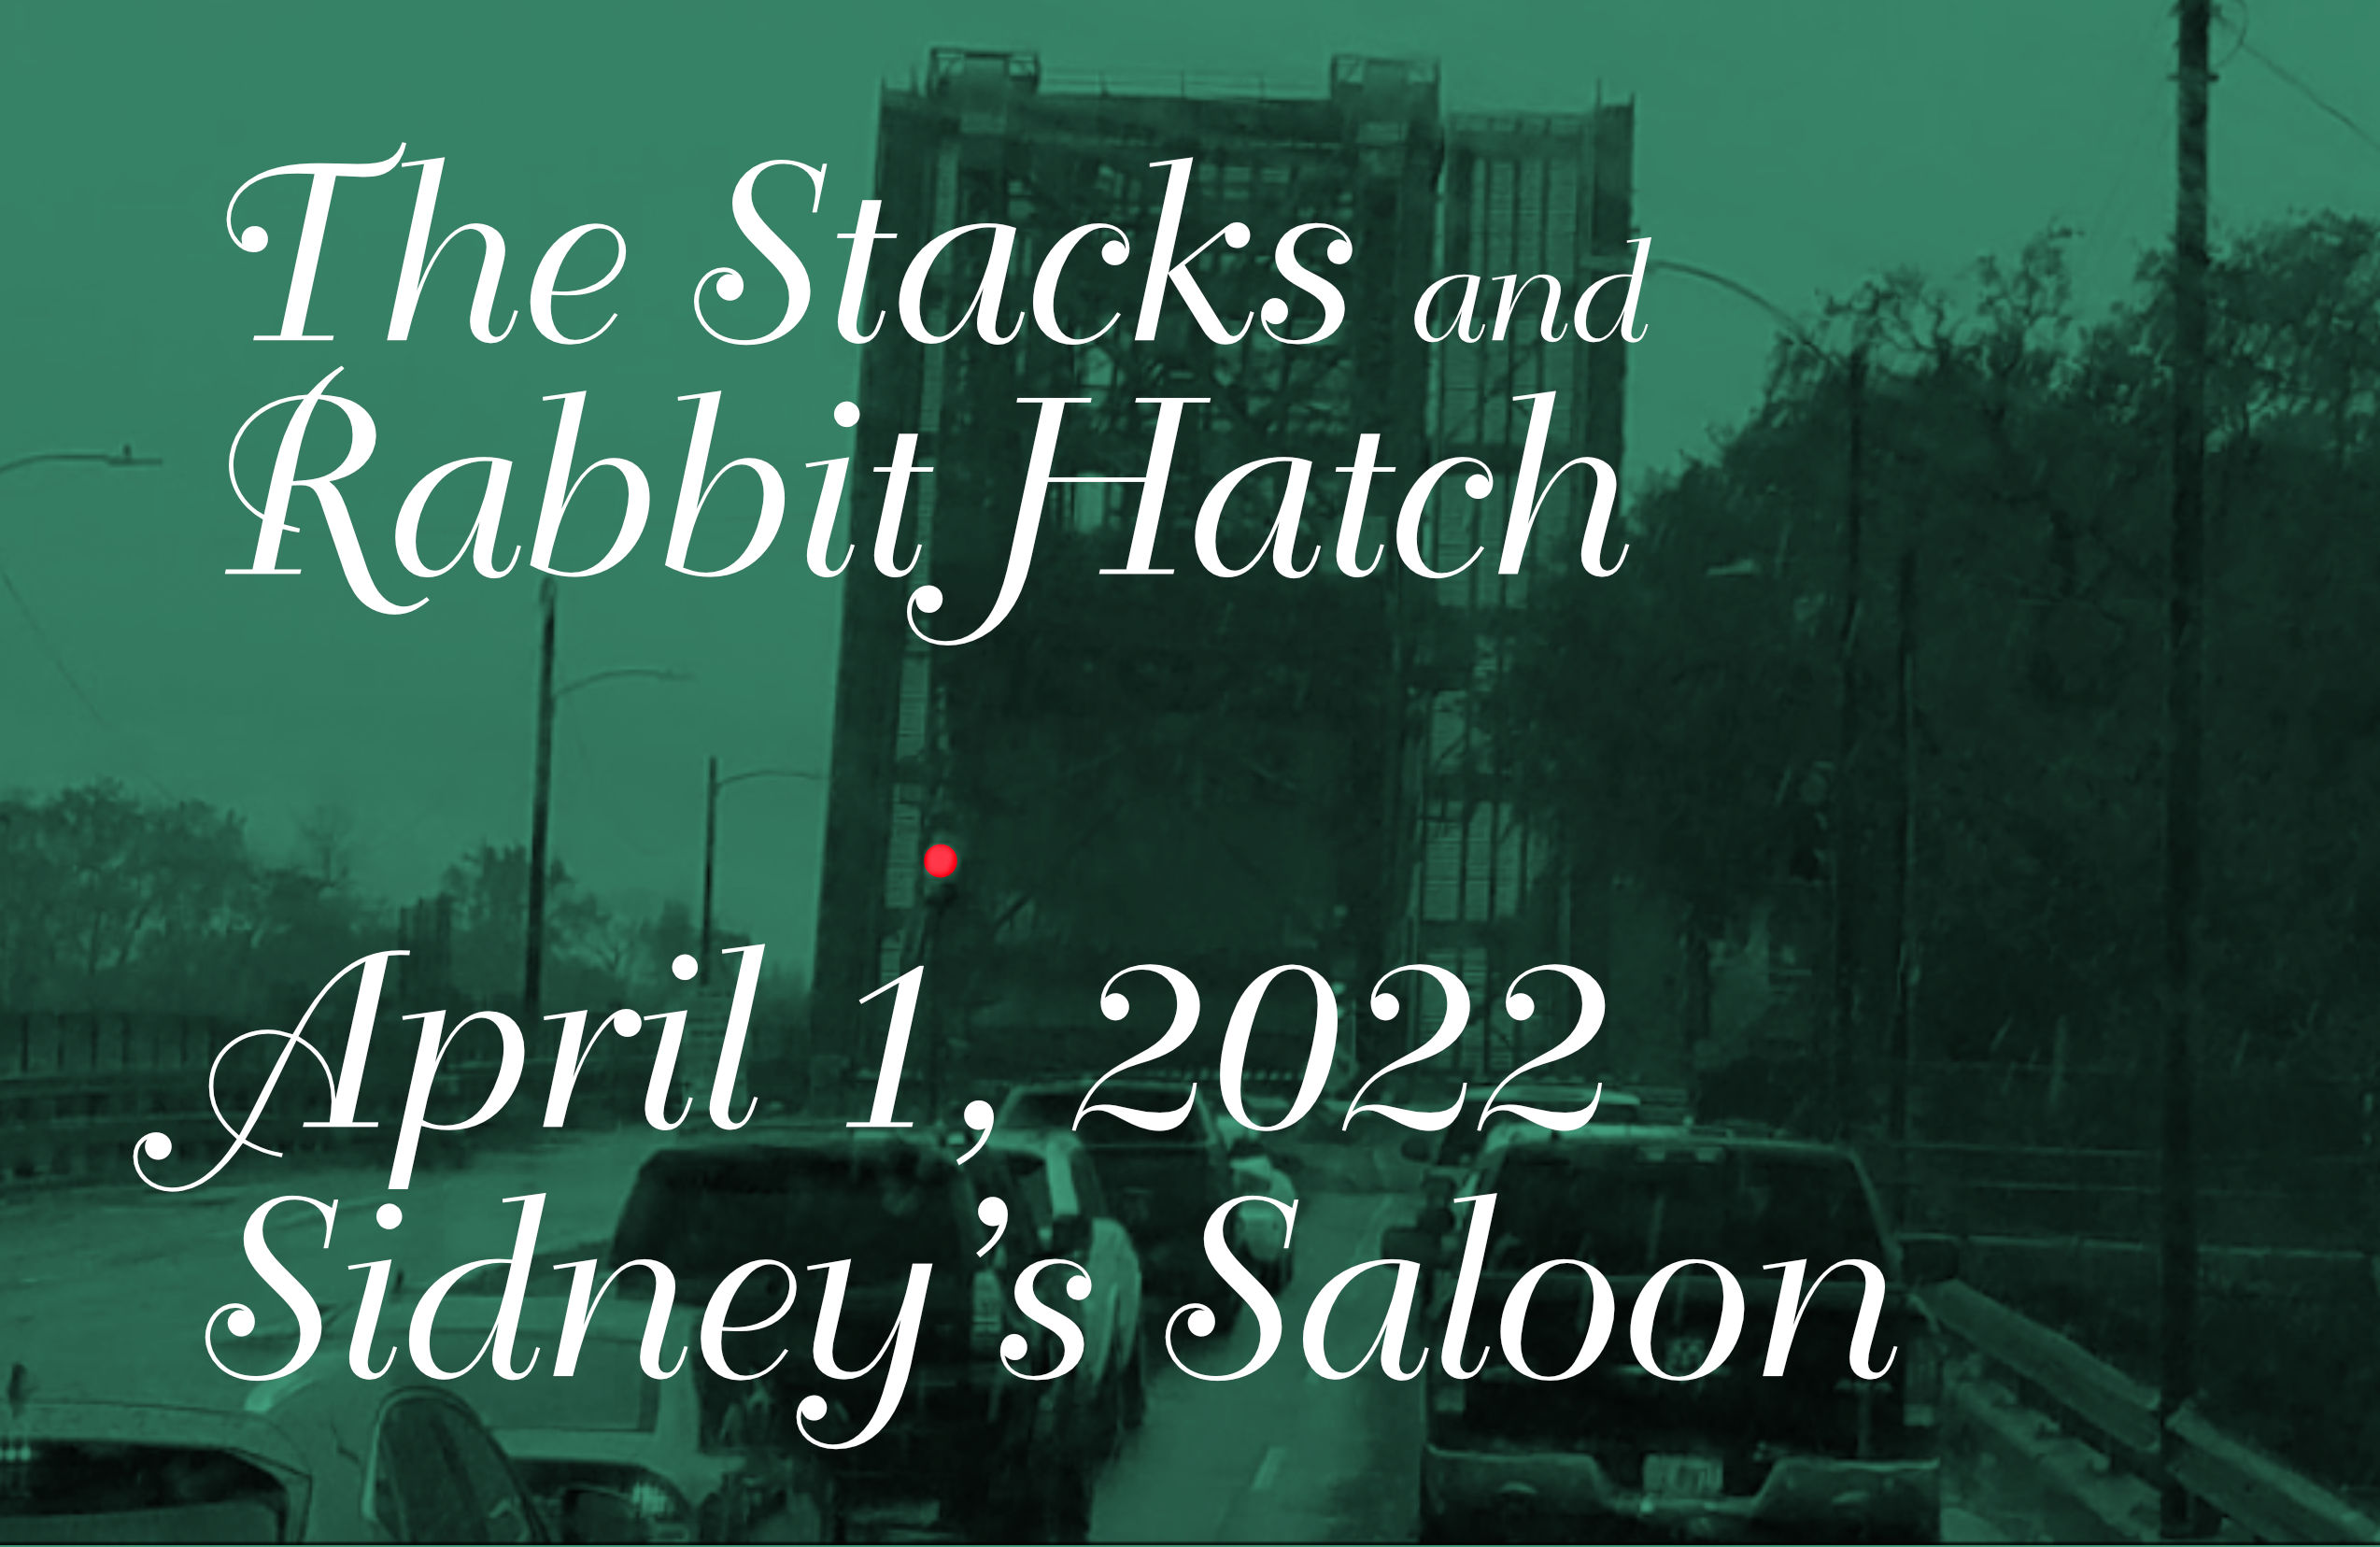 Stacks and Rabbit Hatch flyer